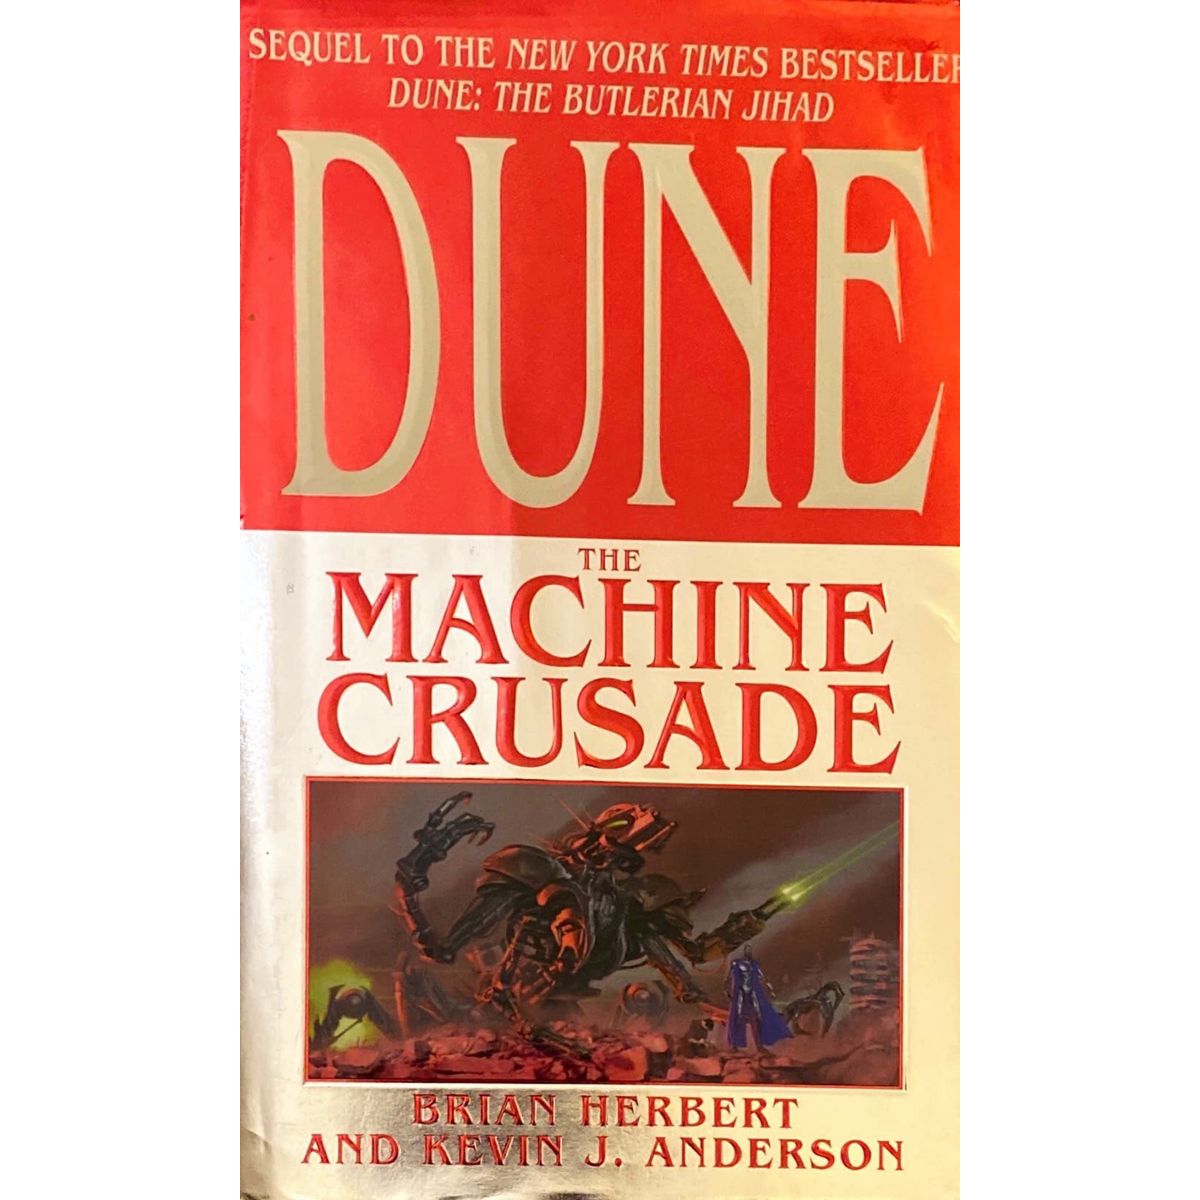 ISBN: 9780340823354 / 0340823356 - Dune: The Machine Crusade by Brian Herbert and Kevin J. Anderson [2003]